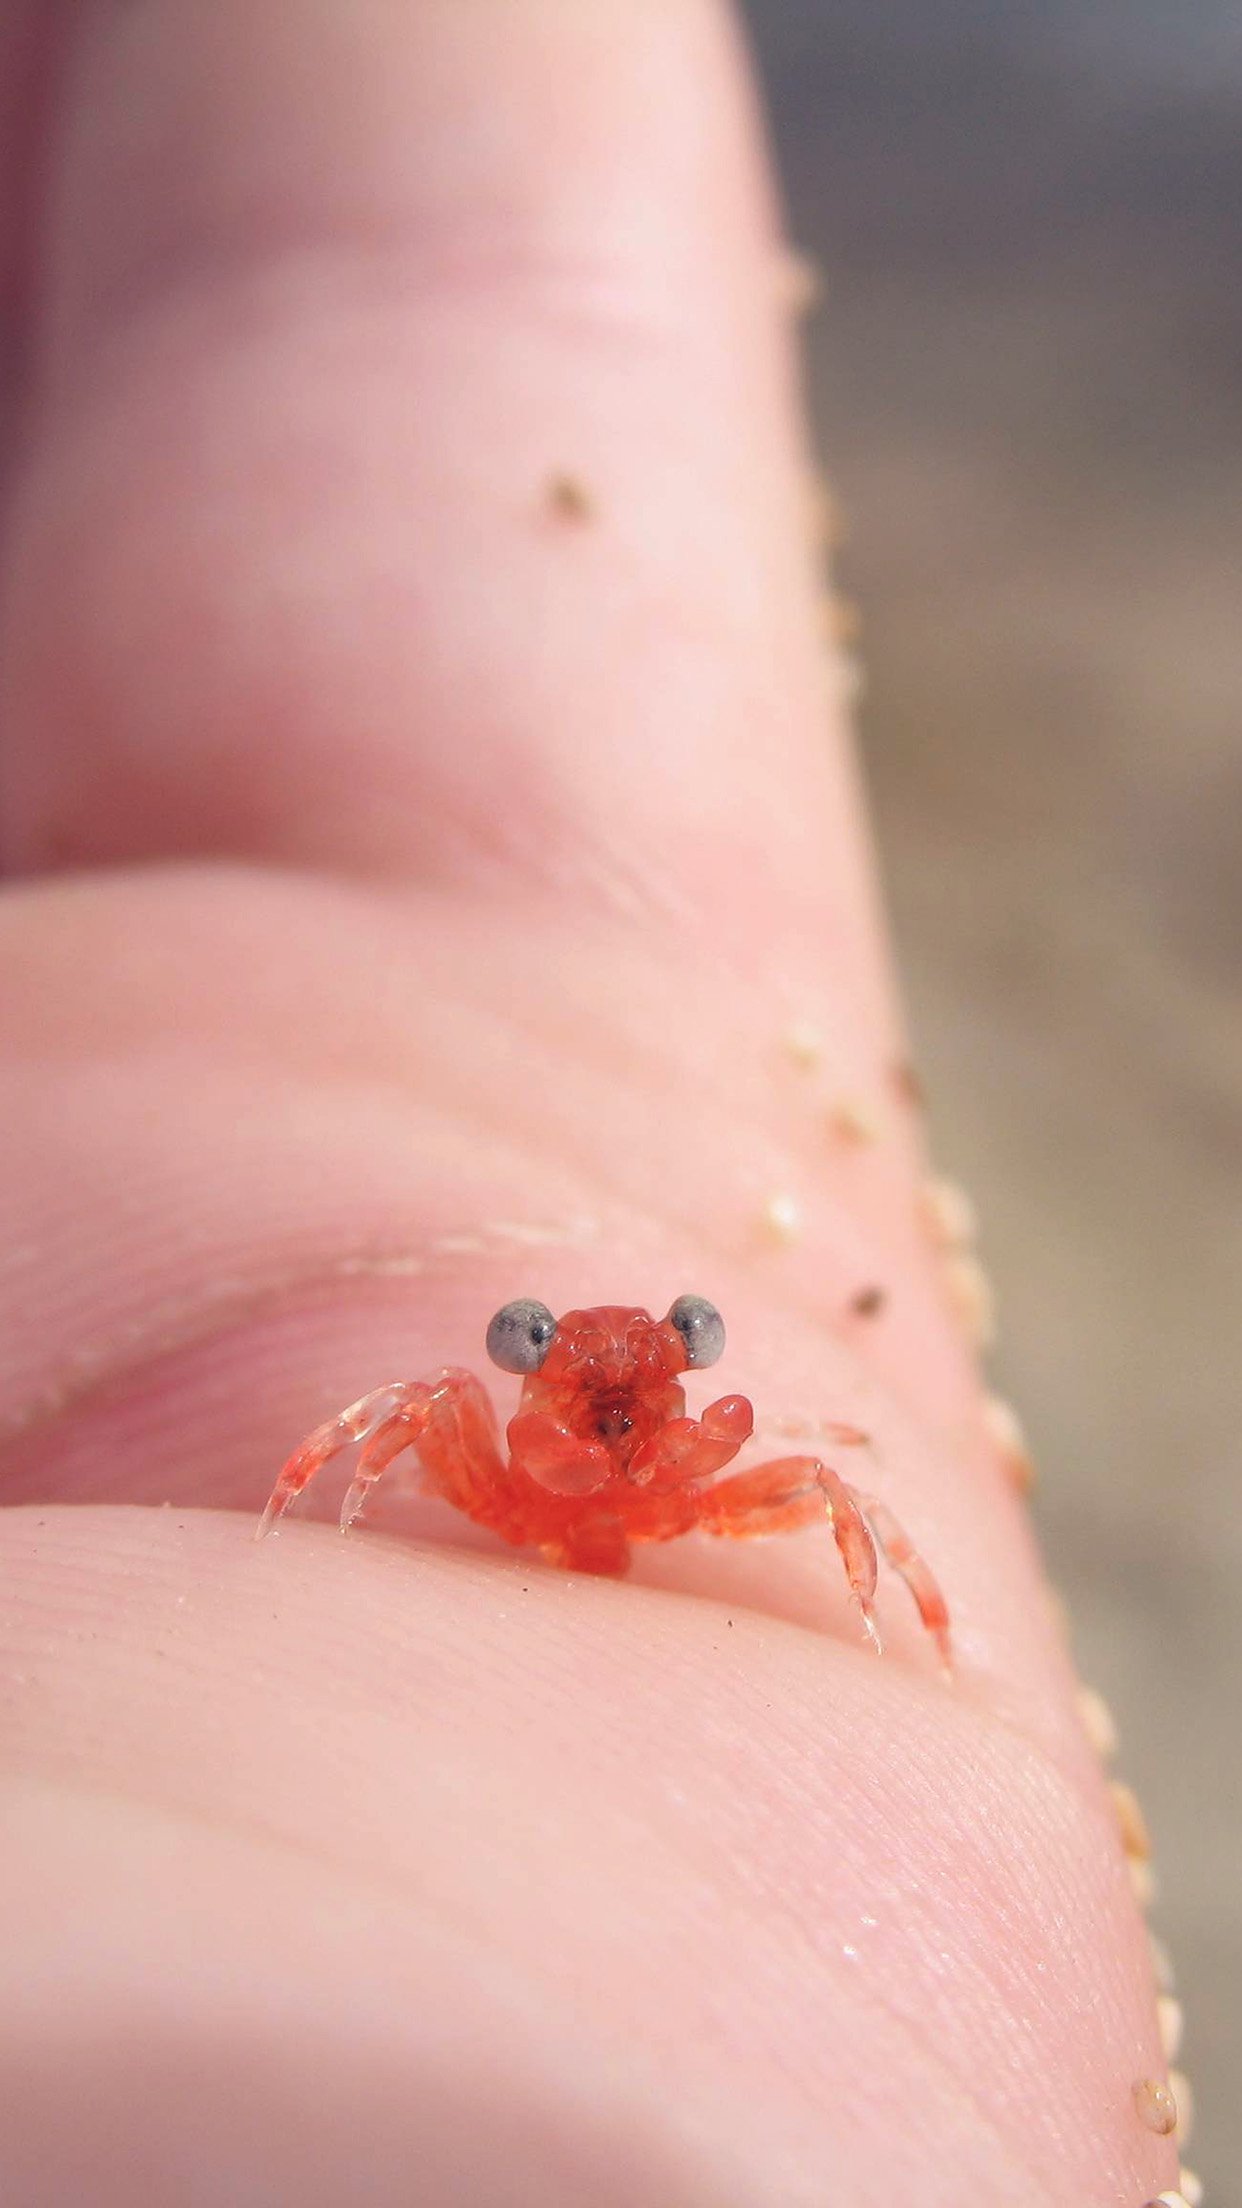 Tiny Little Crab Hand Animal Sea Cute Flare Android wallpaper